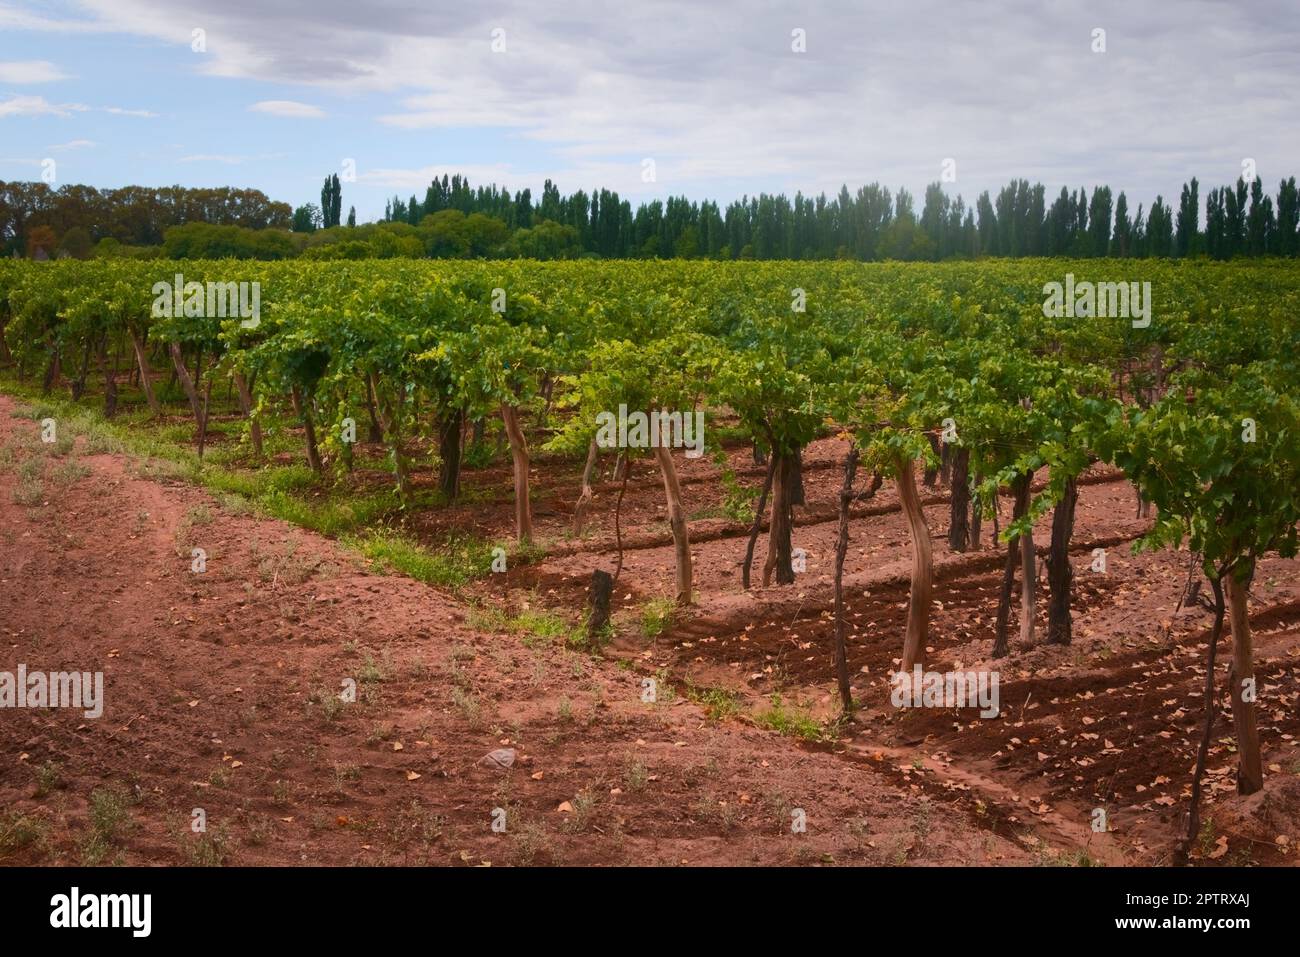 Grapevine rows at a vineyard estate in Mendoza, Argentina. Wine industry, agriculture background. Stock Photo